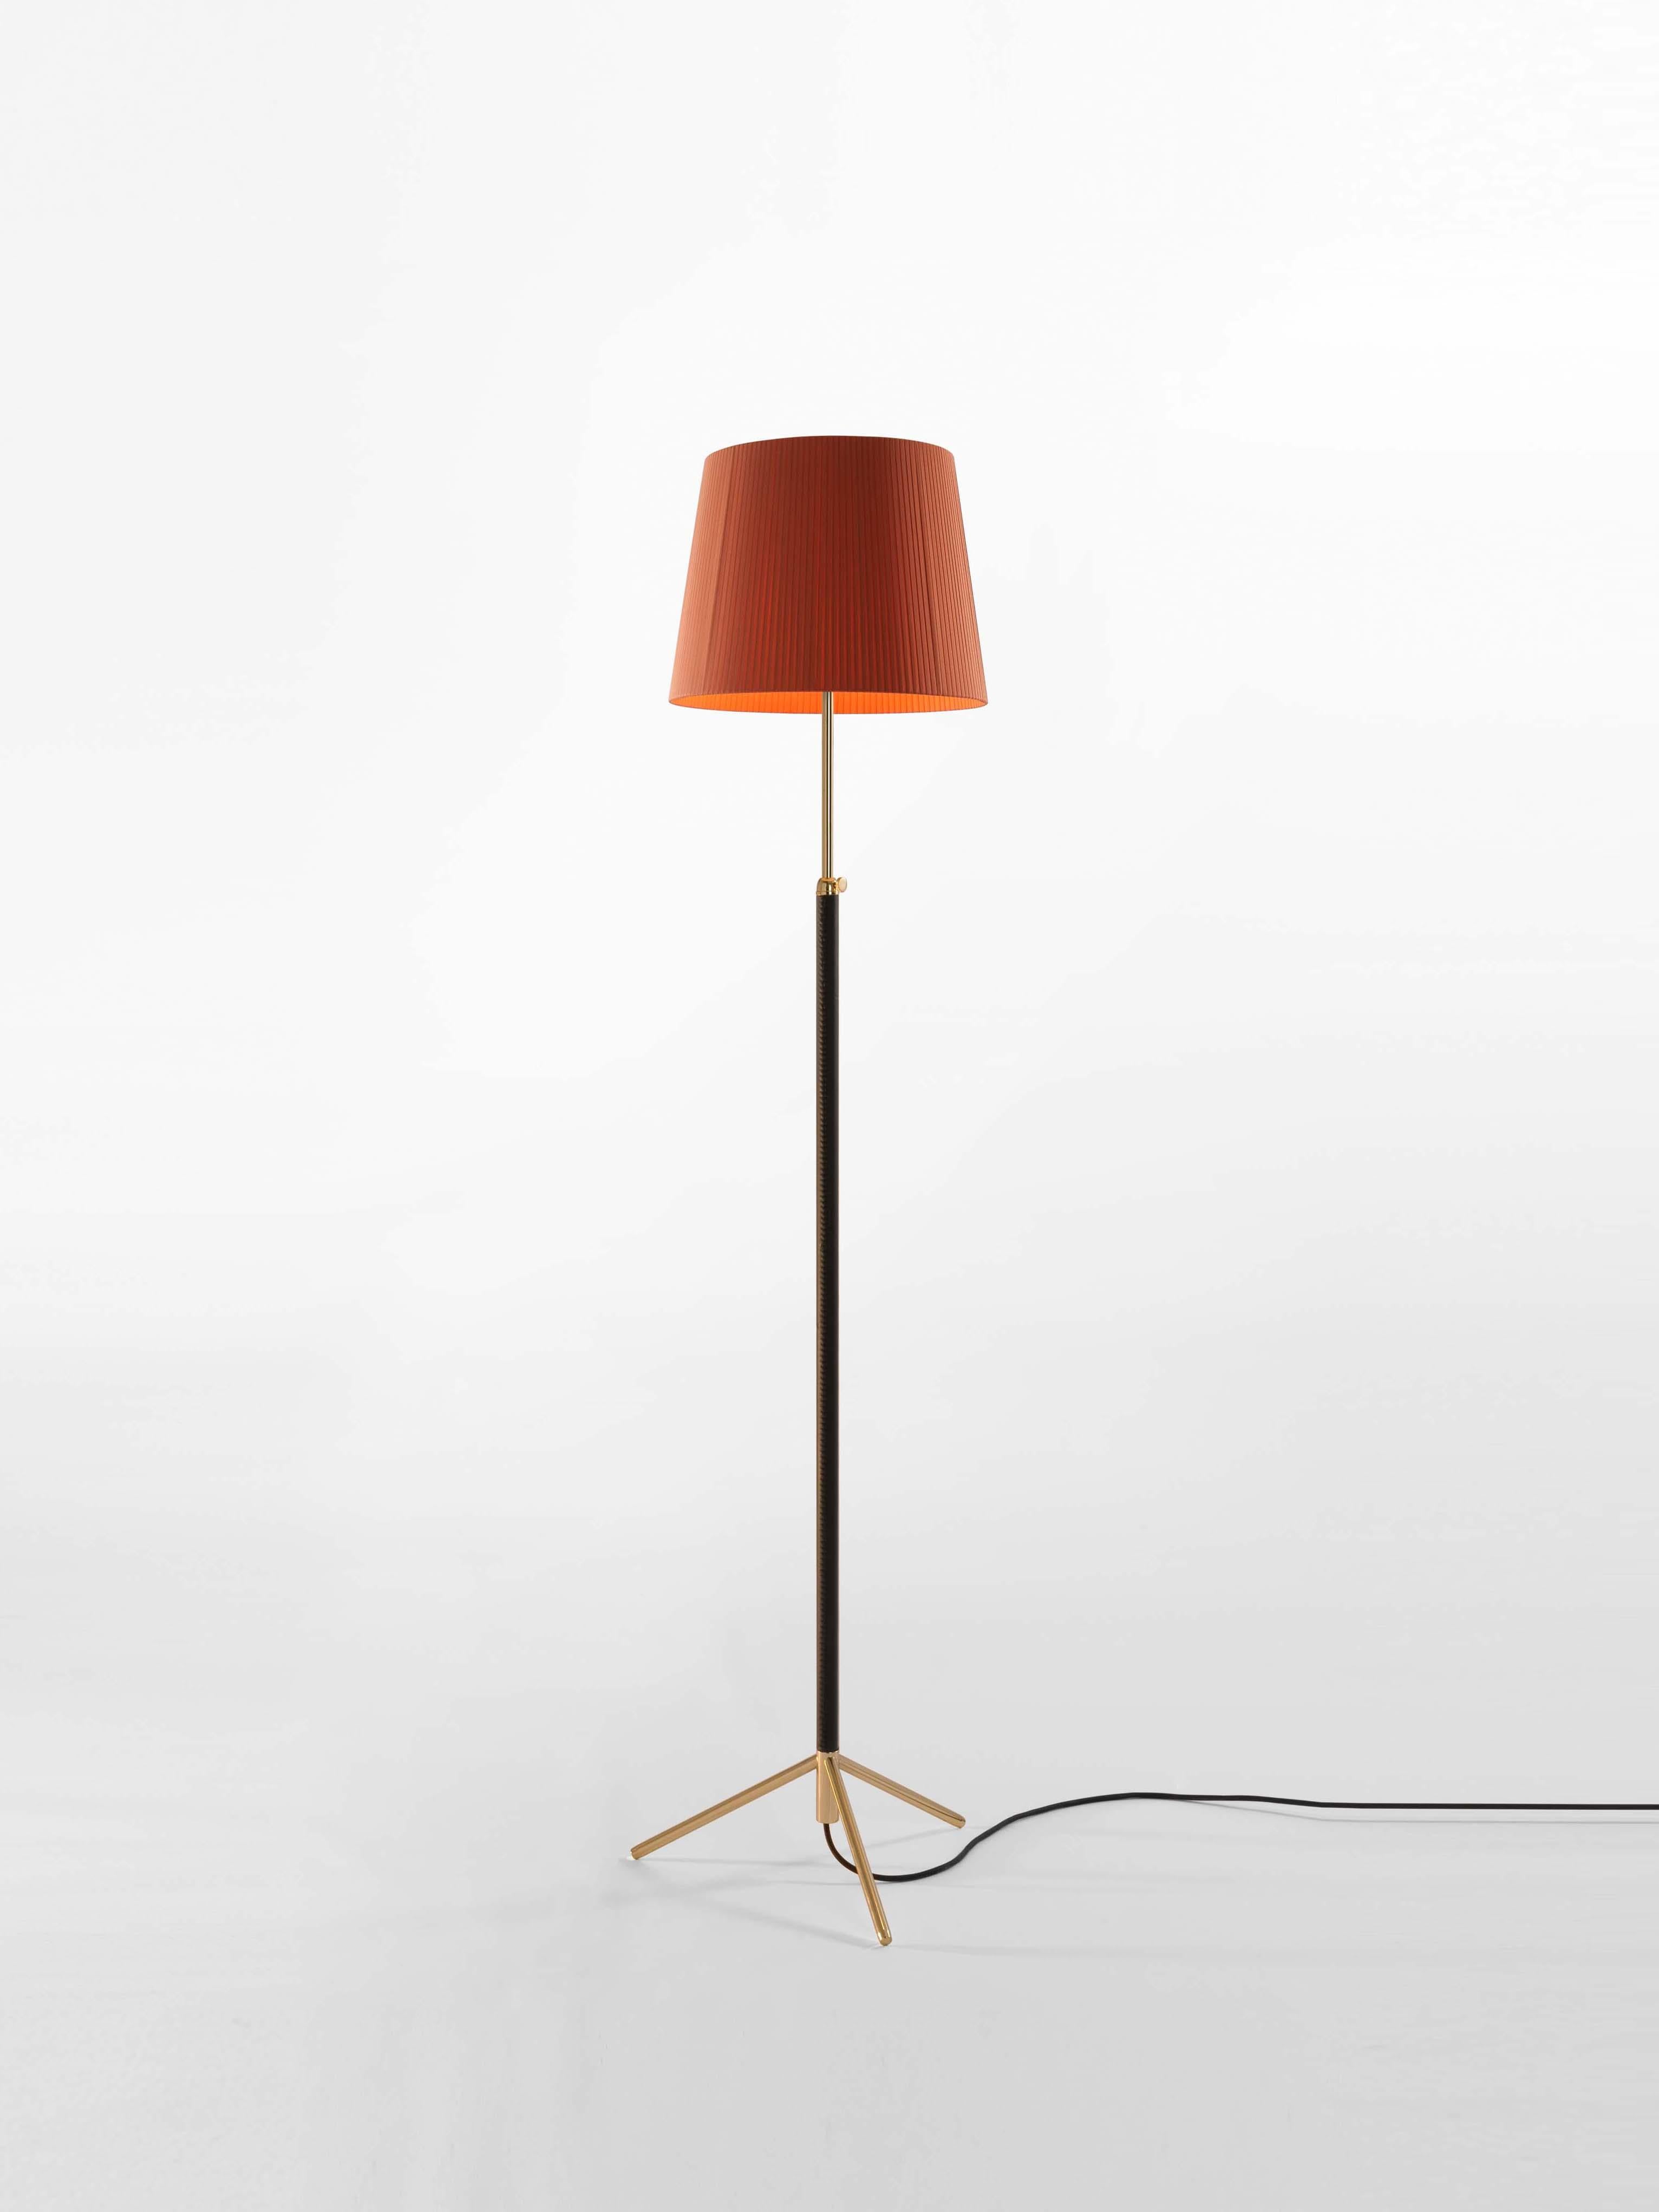 Terracotta and brass Pie de Salón G3 floor lamp by Jaume Sans
Dimensions: D 40 x H 120-160 cm
Materials: Metal, leather, ribbon.
Available in chrome-plated or polished brass structure.
Available in other shade colors and sizes.

This slender